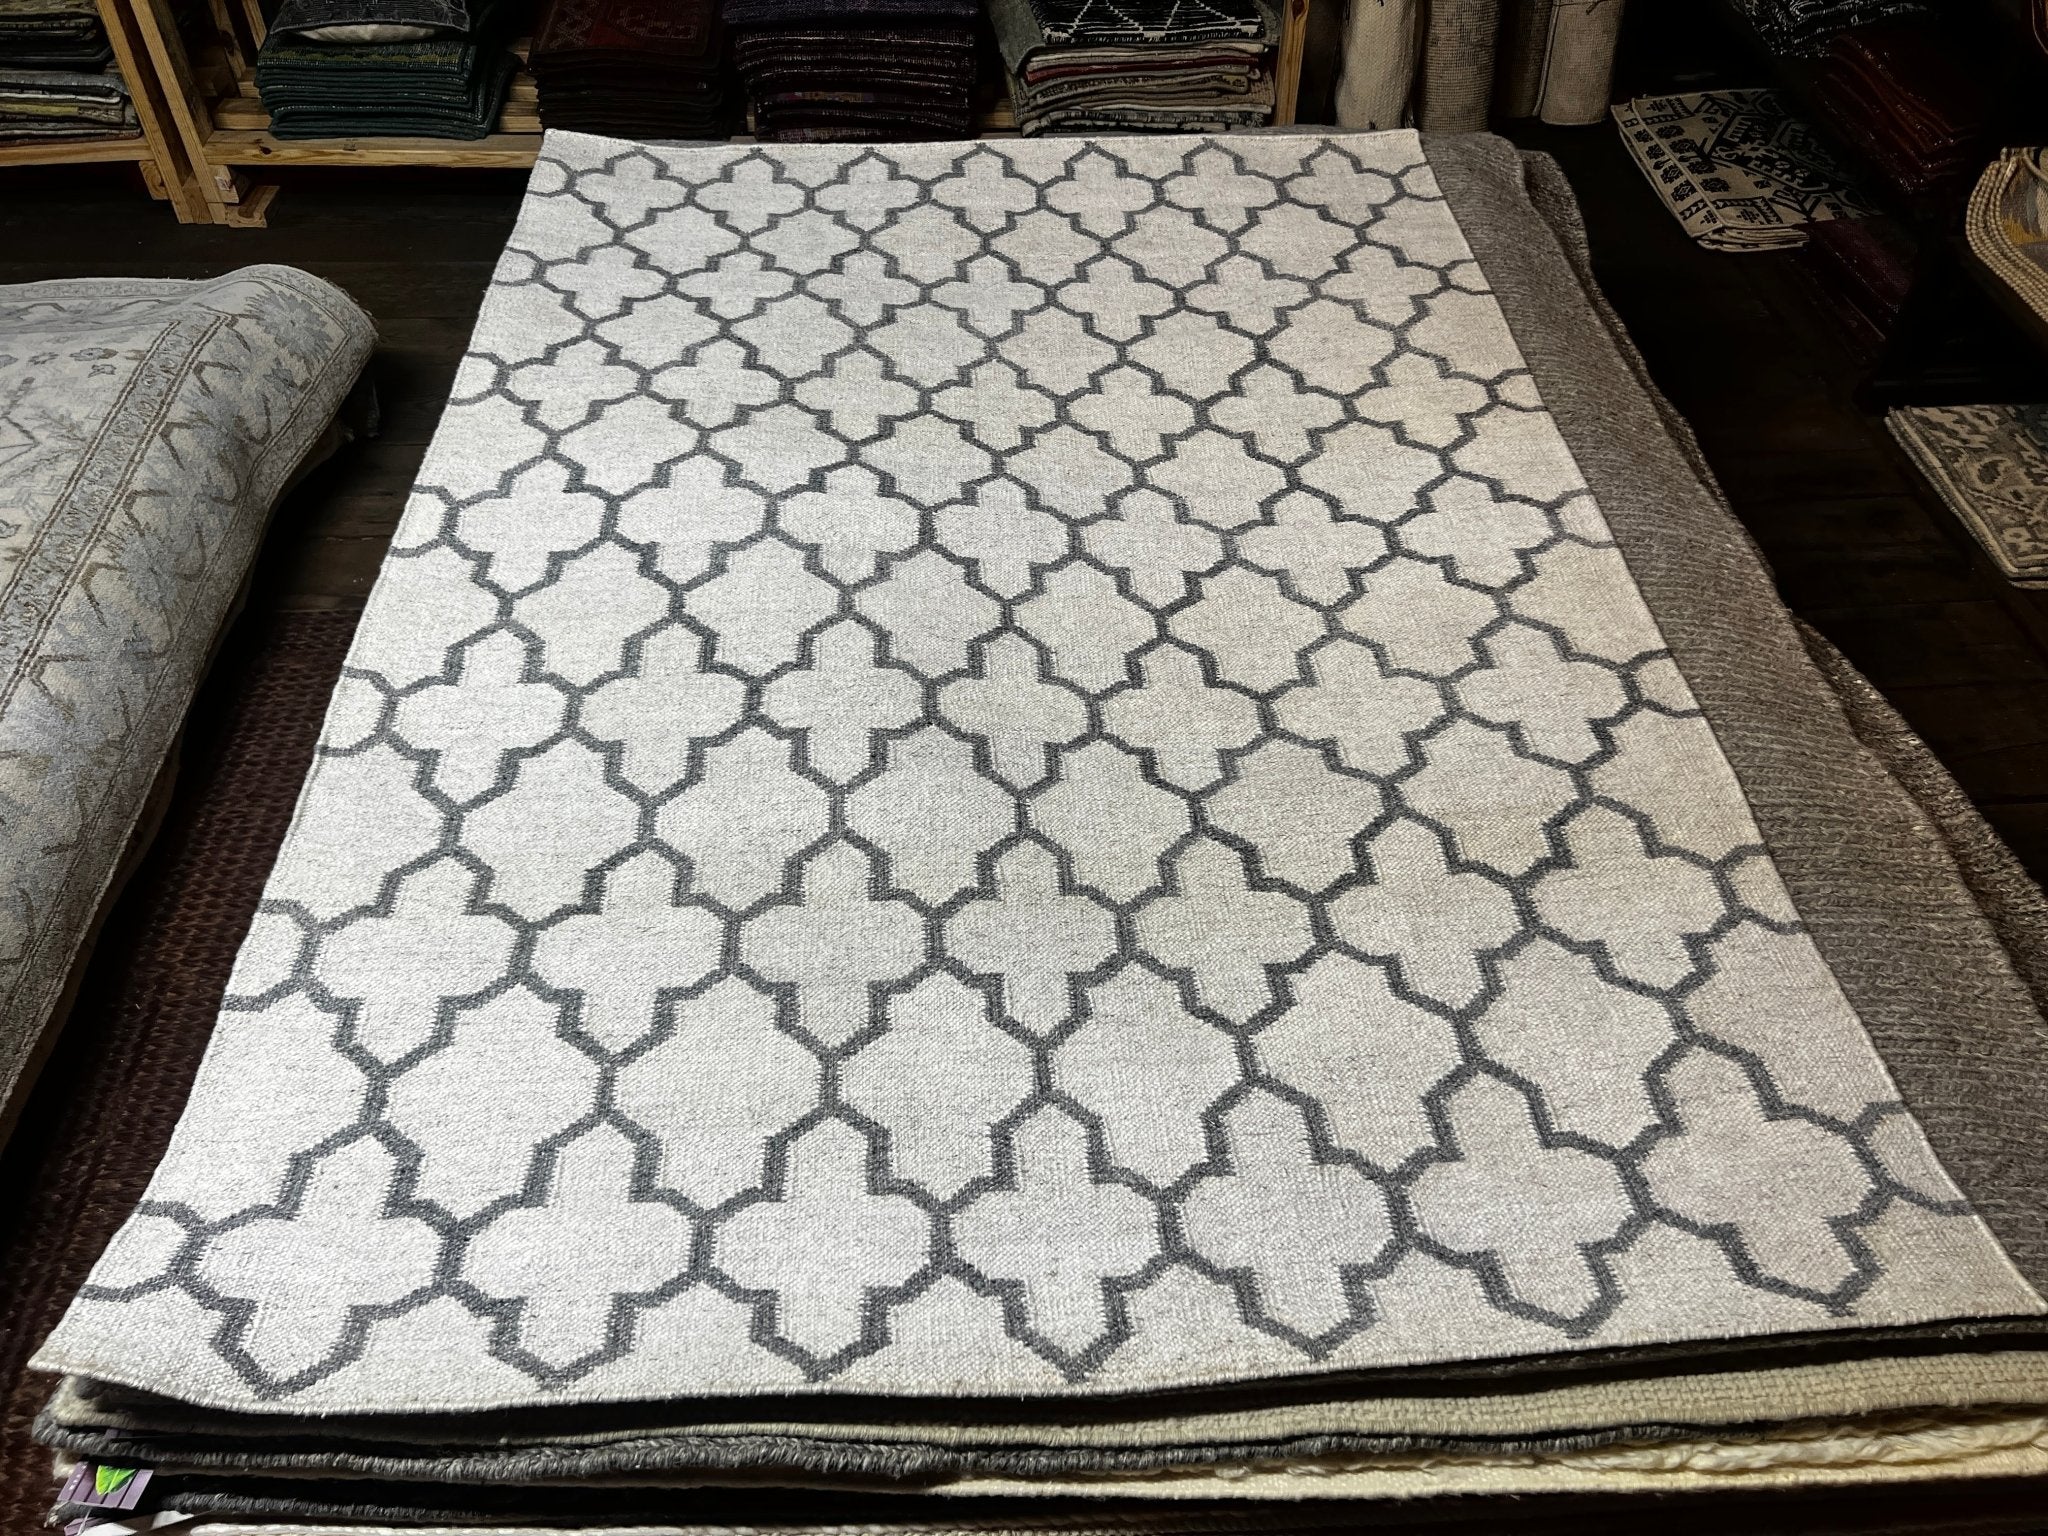 https://cdn.shopify.com/s/files/1/0257/9169/2836/products/tilly-ivory-and-grey-handwoven-jali-rug-multiple-sizes-837222.jpg?v=1701369487